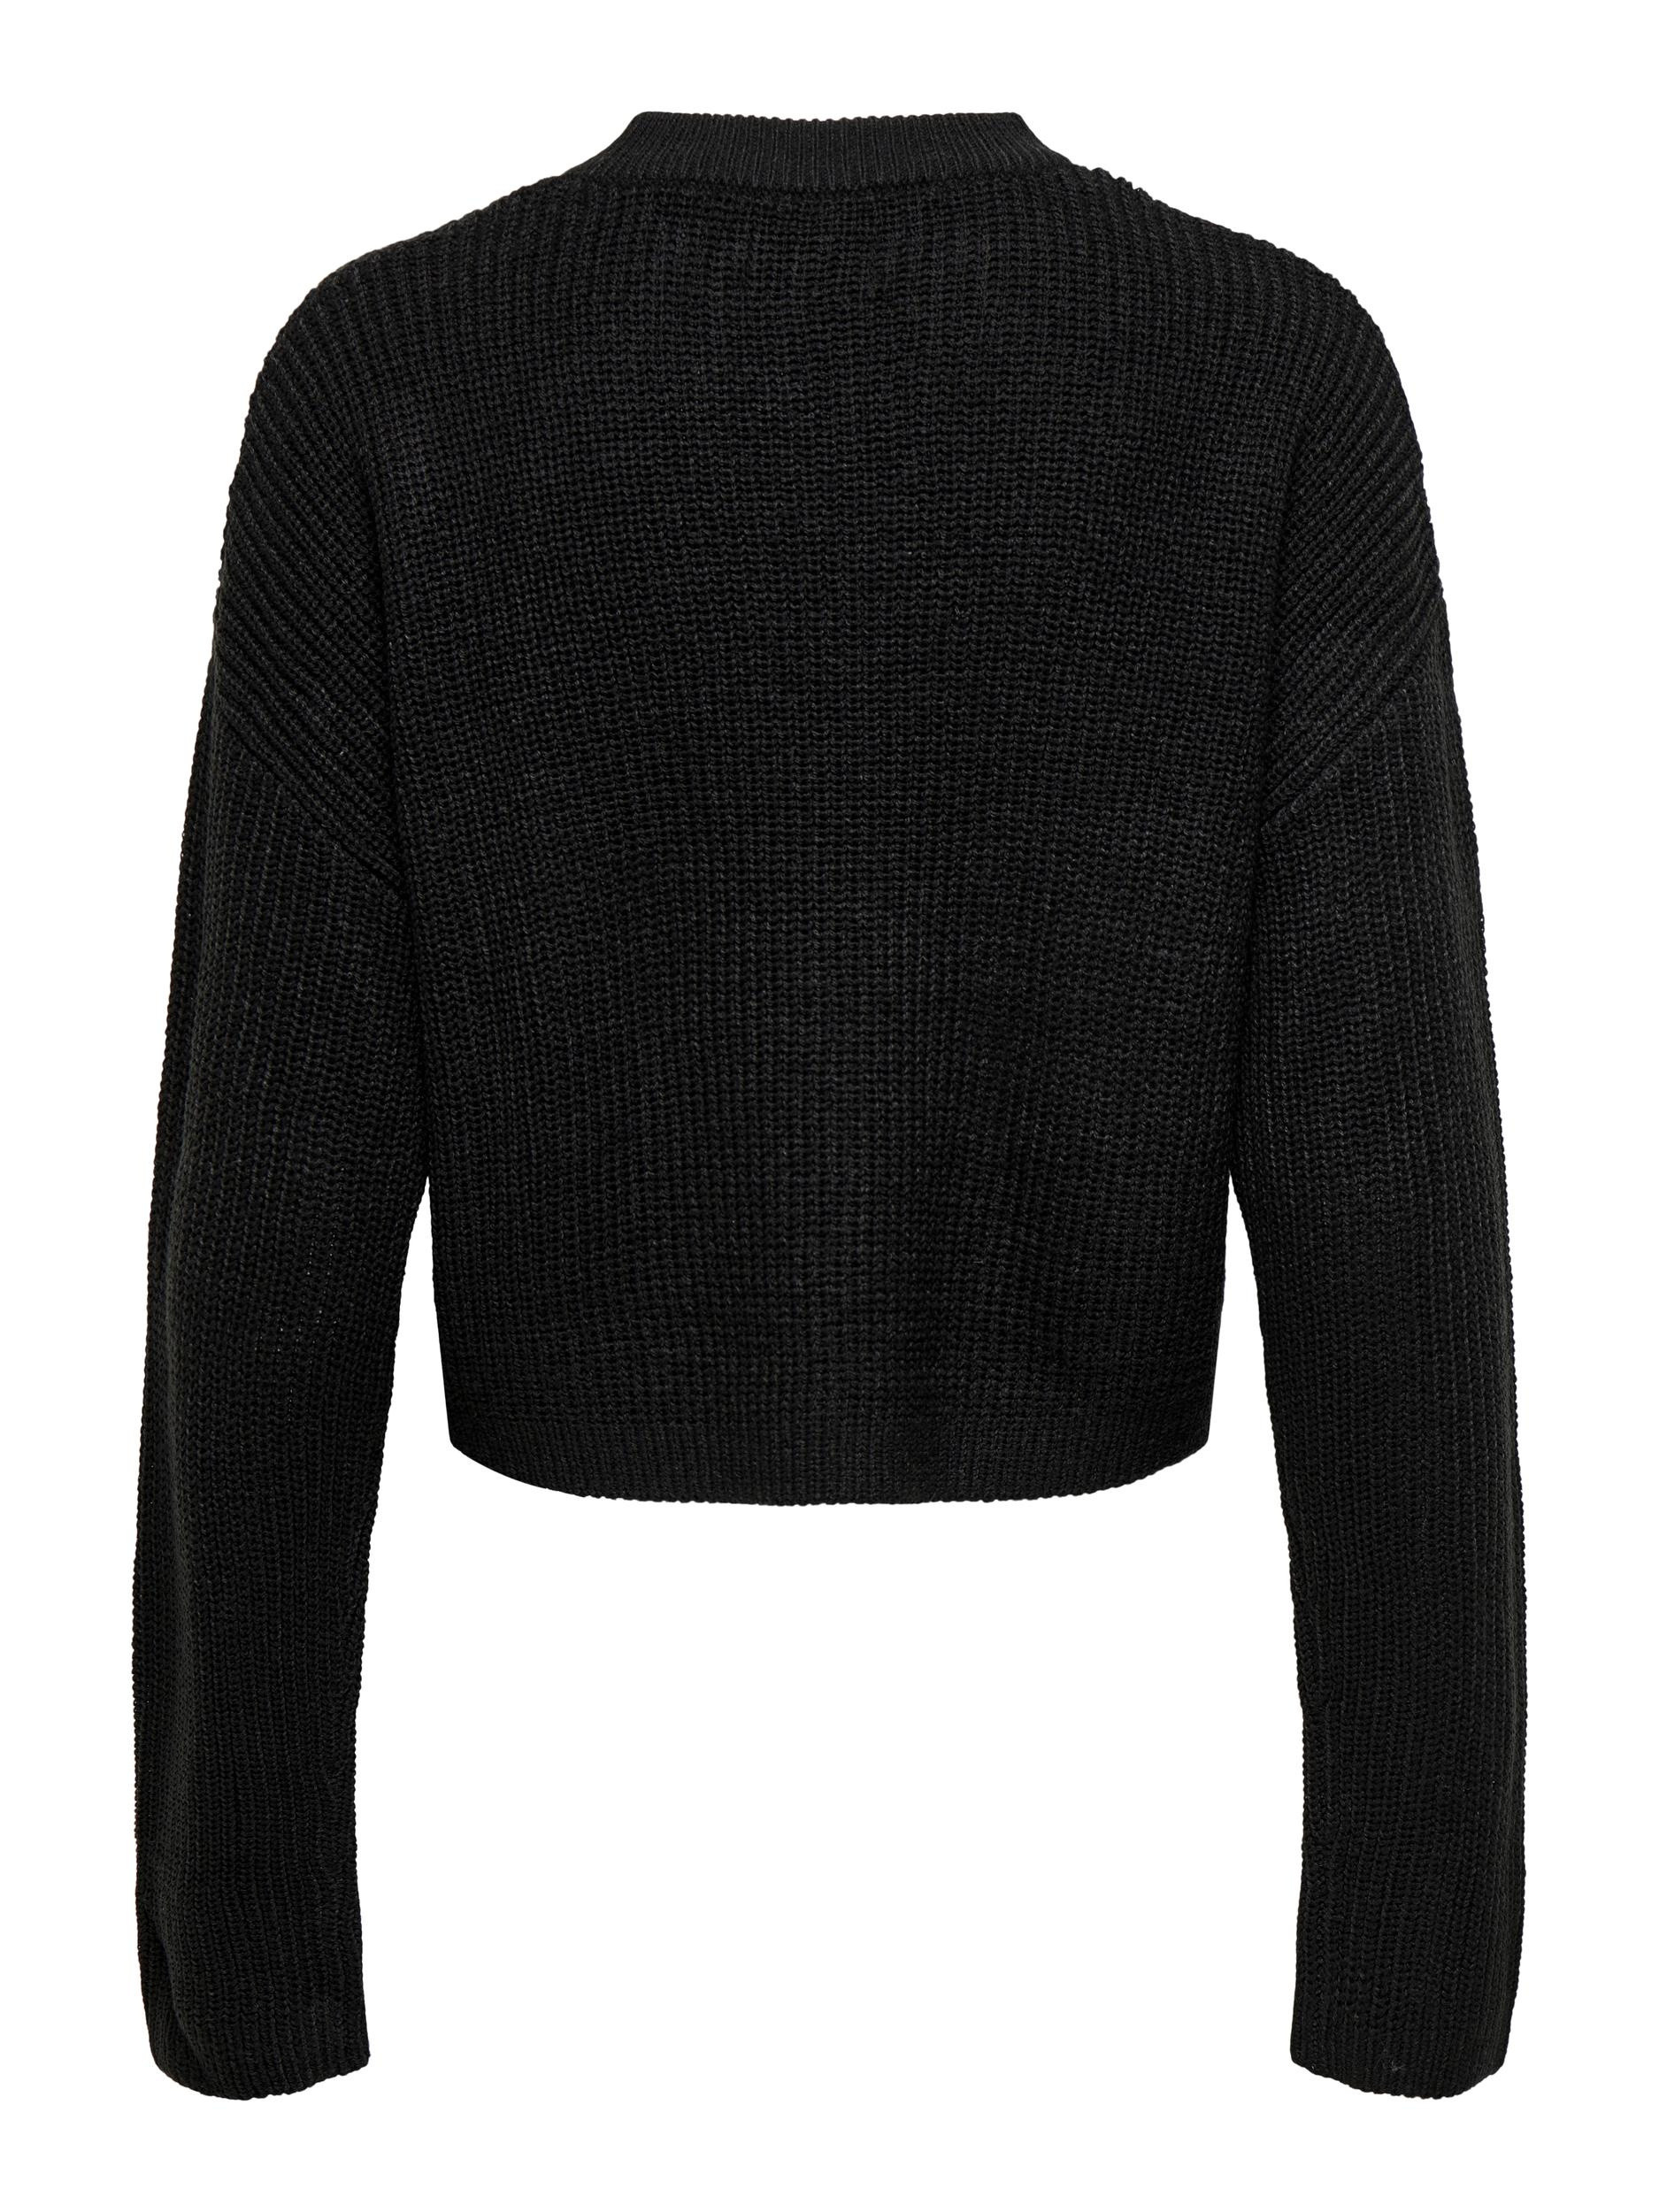 Only - Ribbed pullover, Black, large image number 1